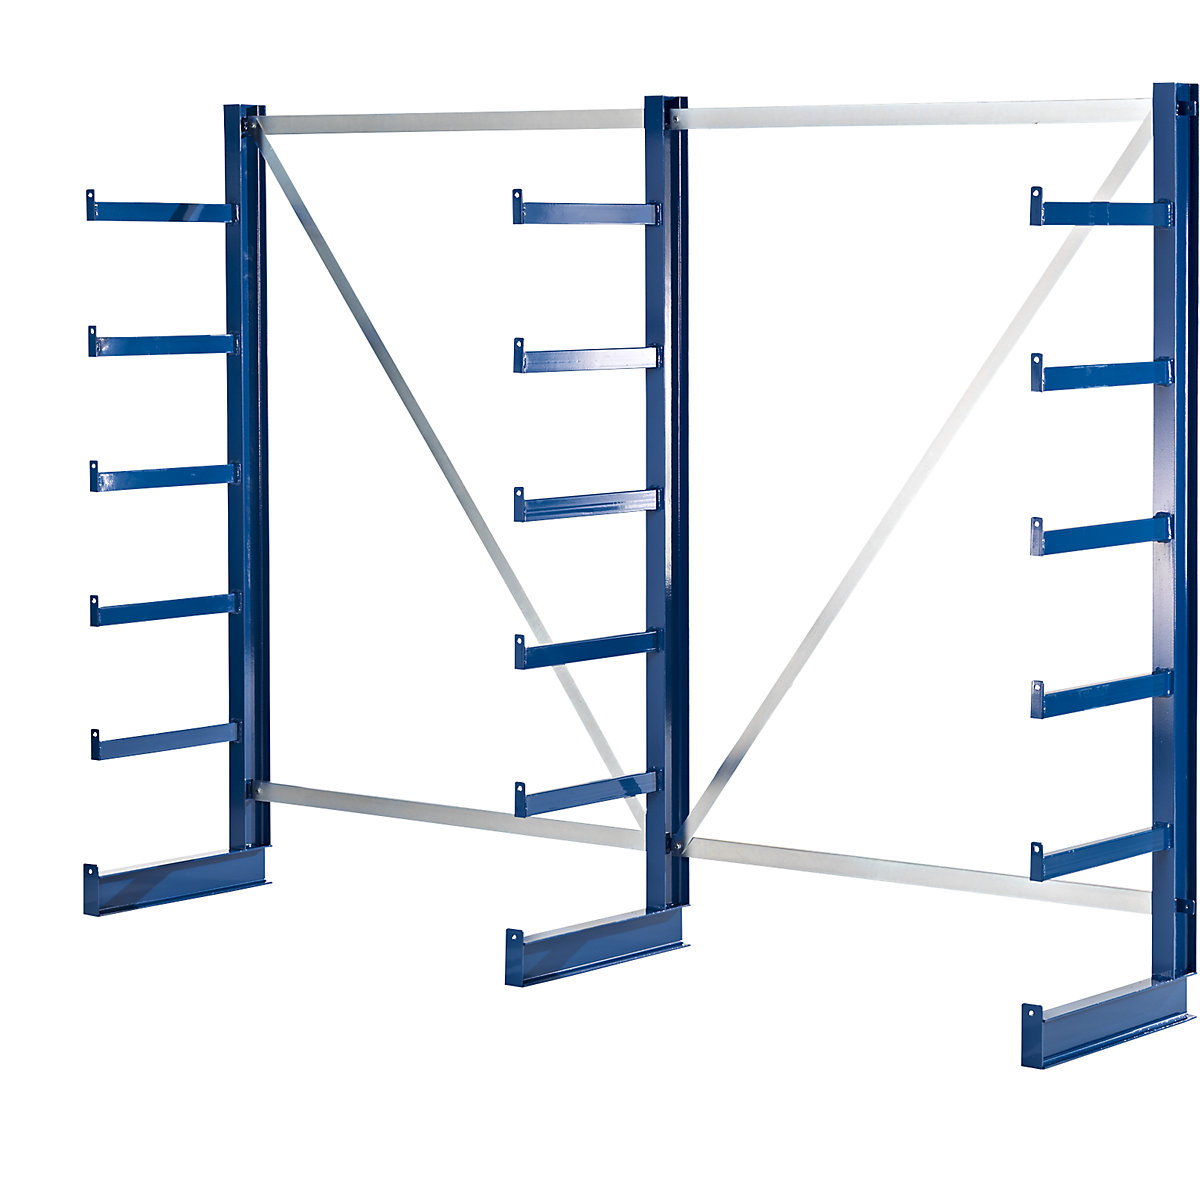 Cantilever racking unit with identical cantilever arm length - eurokraft pro